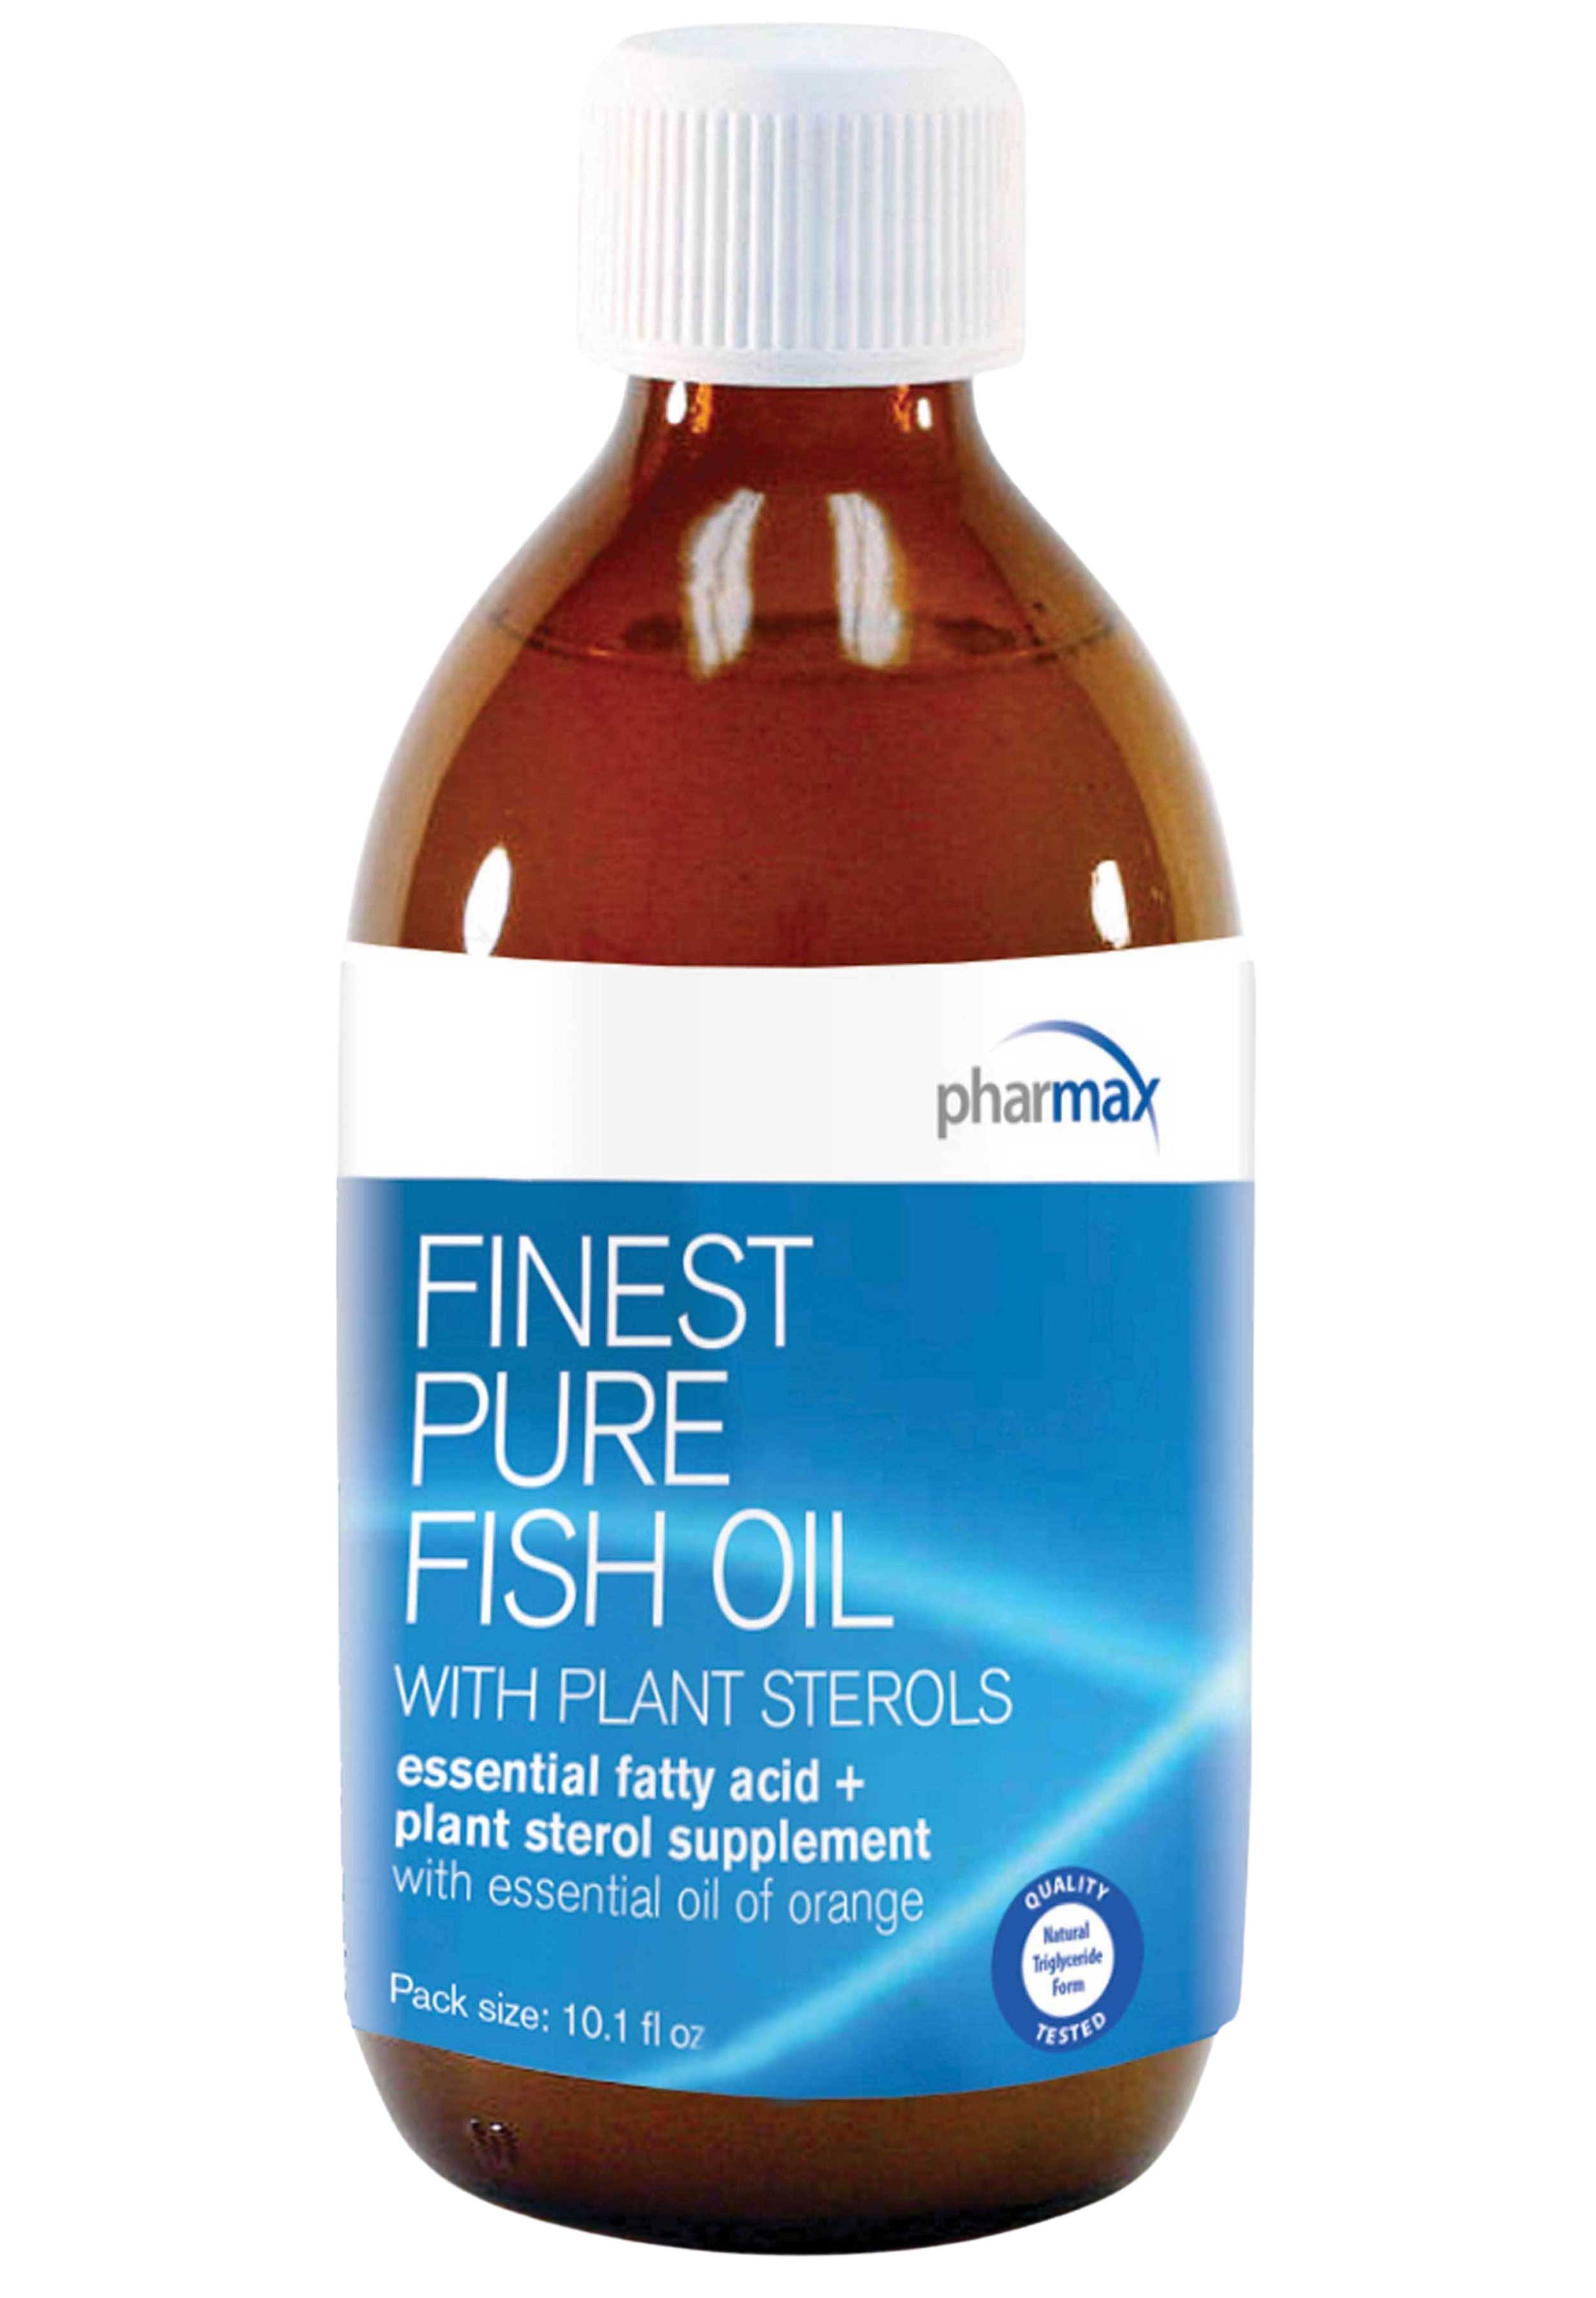 Pharmax Finest Pure Fish Oil with Plant Sterols